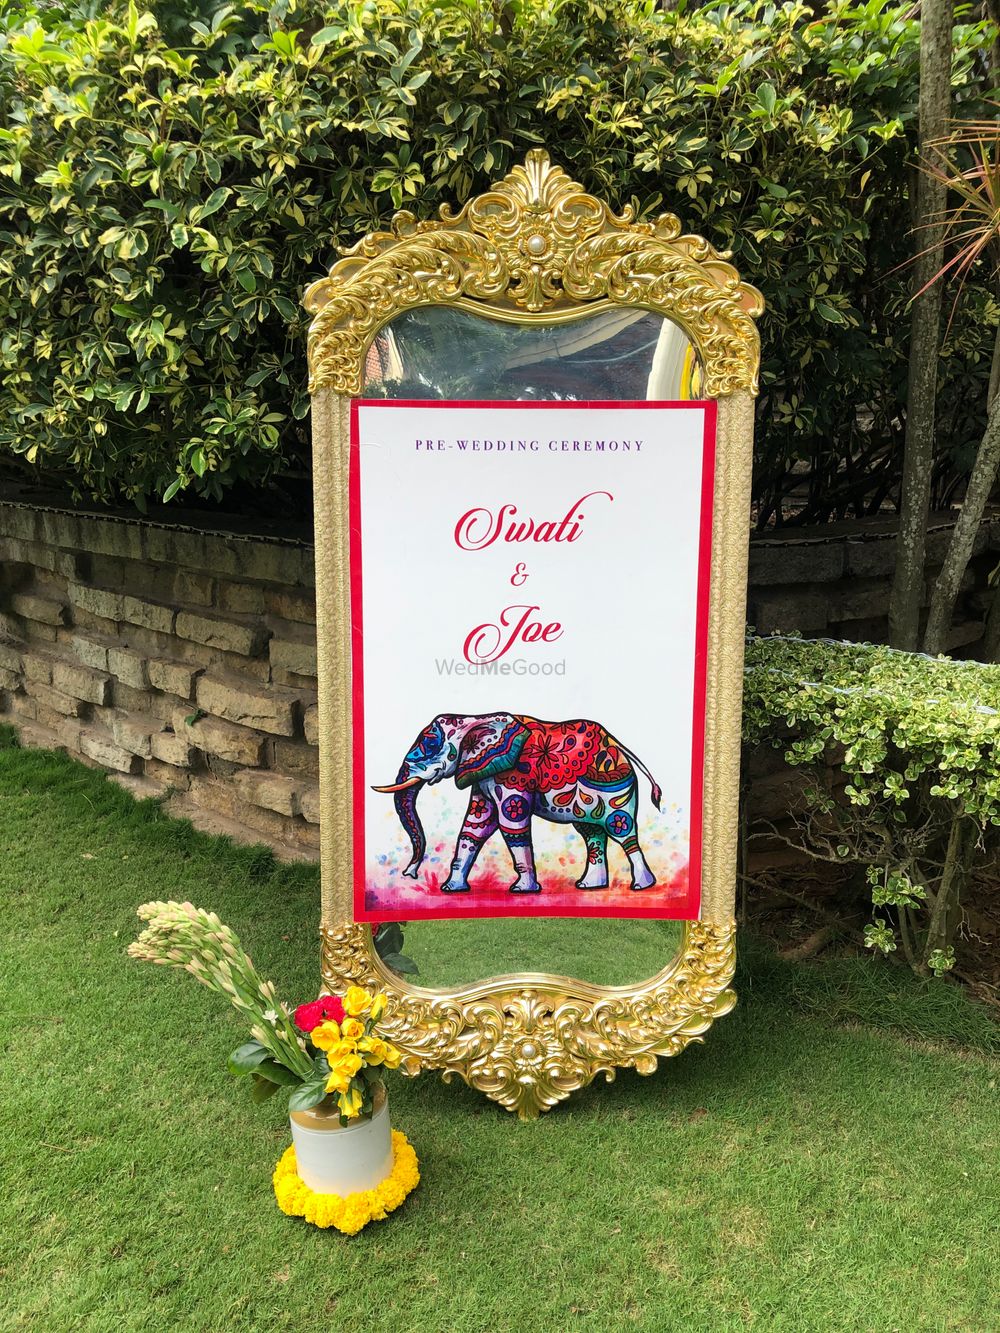 Photo From Outdoor Mehandi Decor - By The Celebration by SwathiReddy